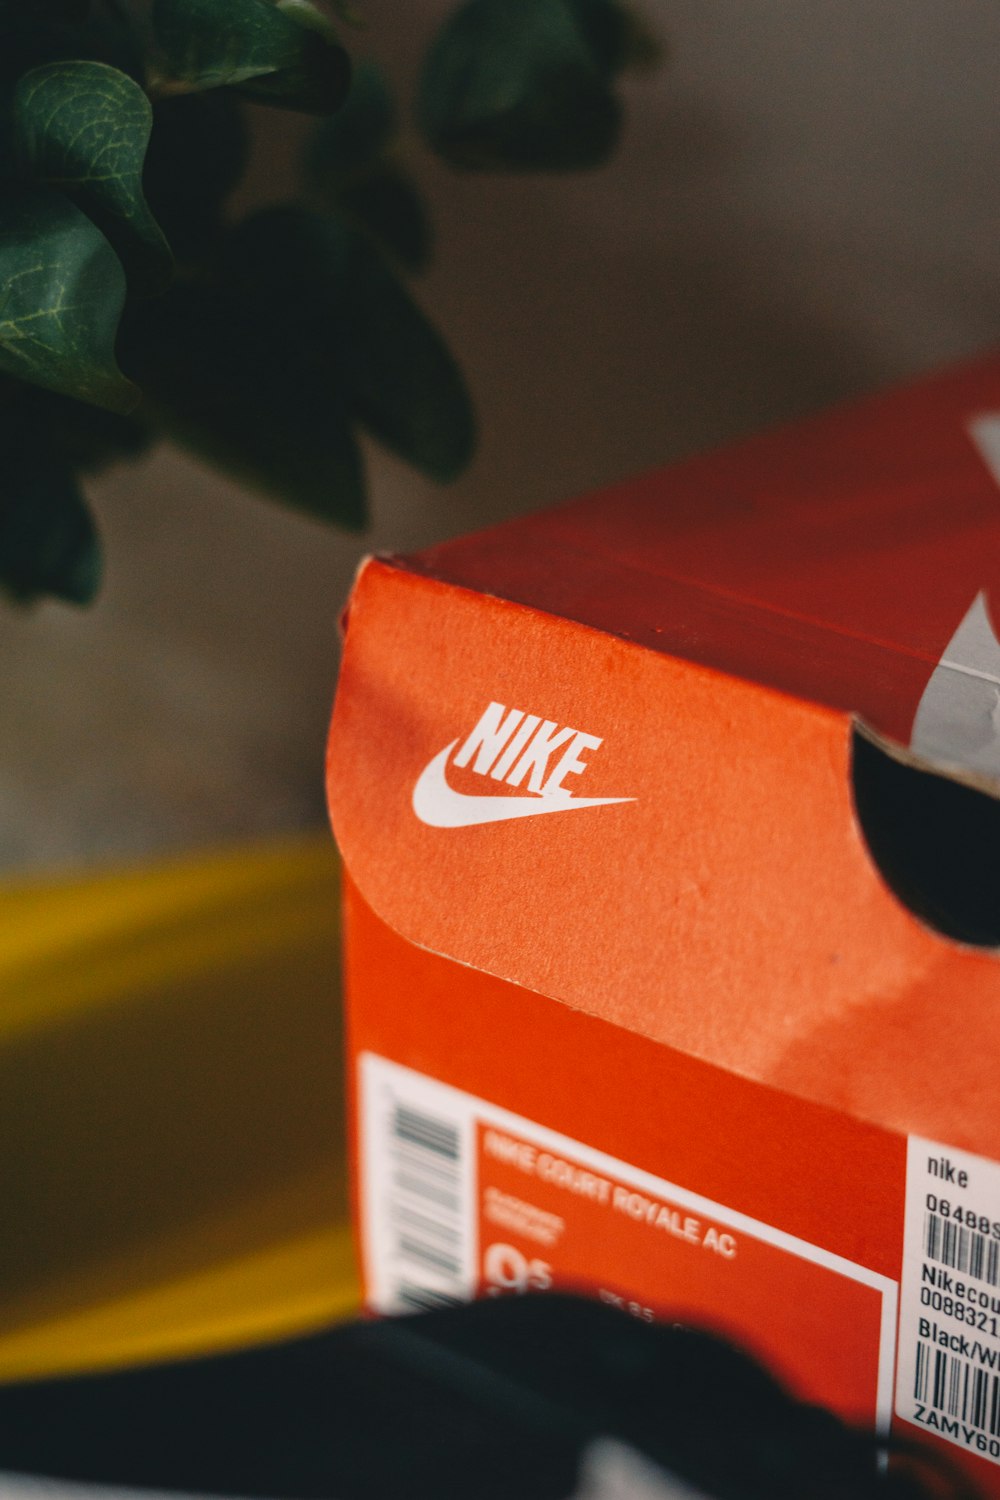 Nike Box Pictures | Download Free Images on Unsplash